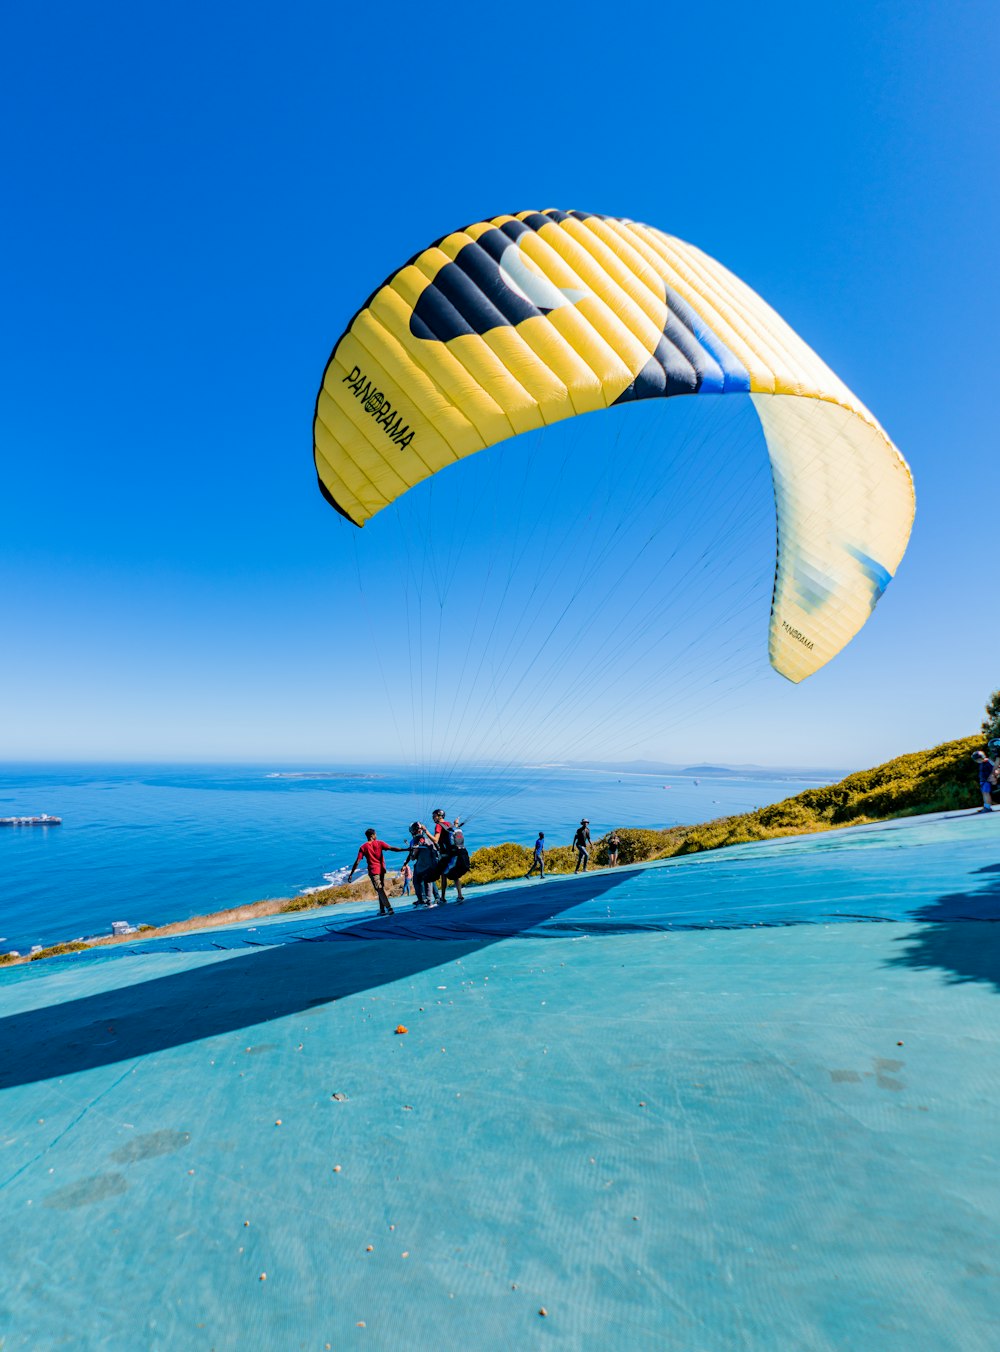 a person is parasailing over a large body of water